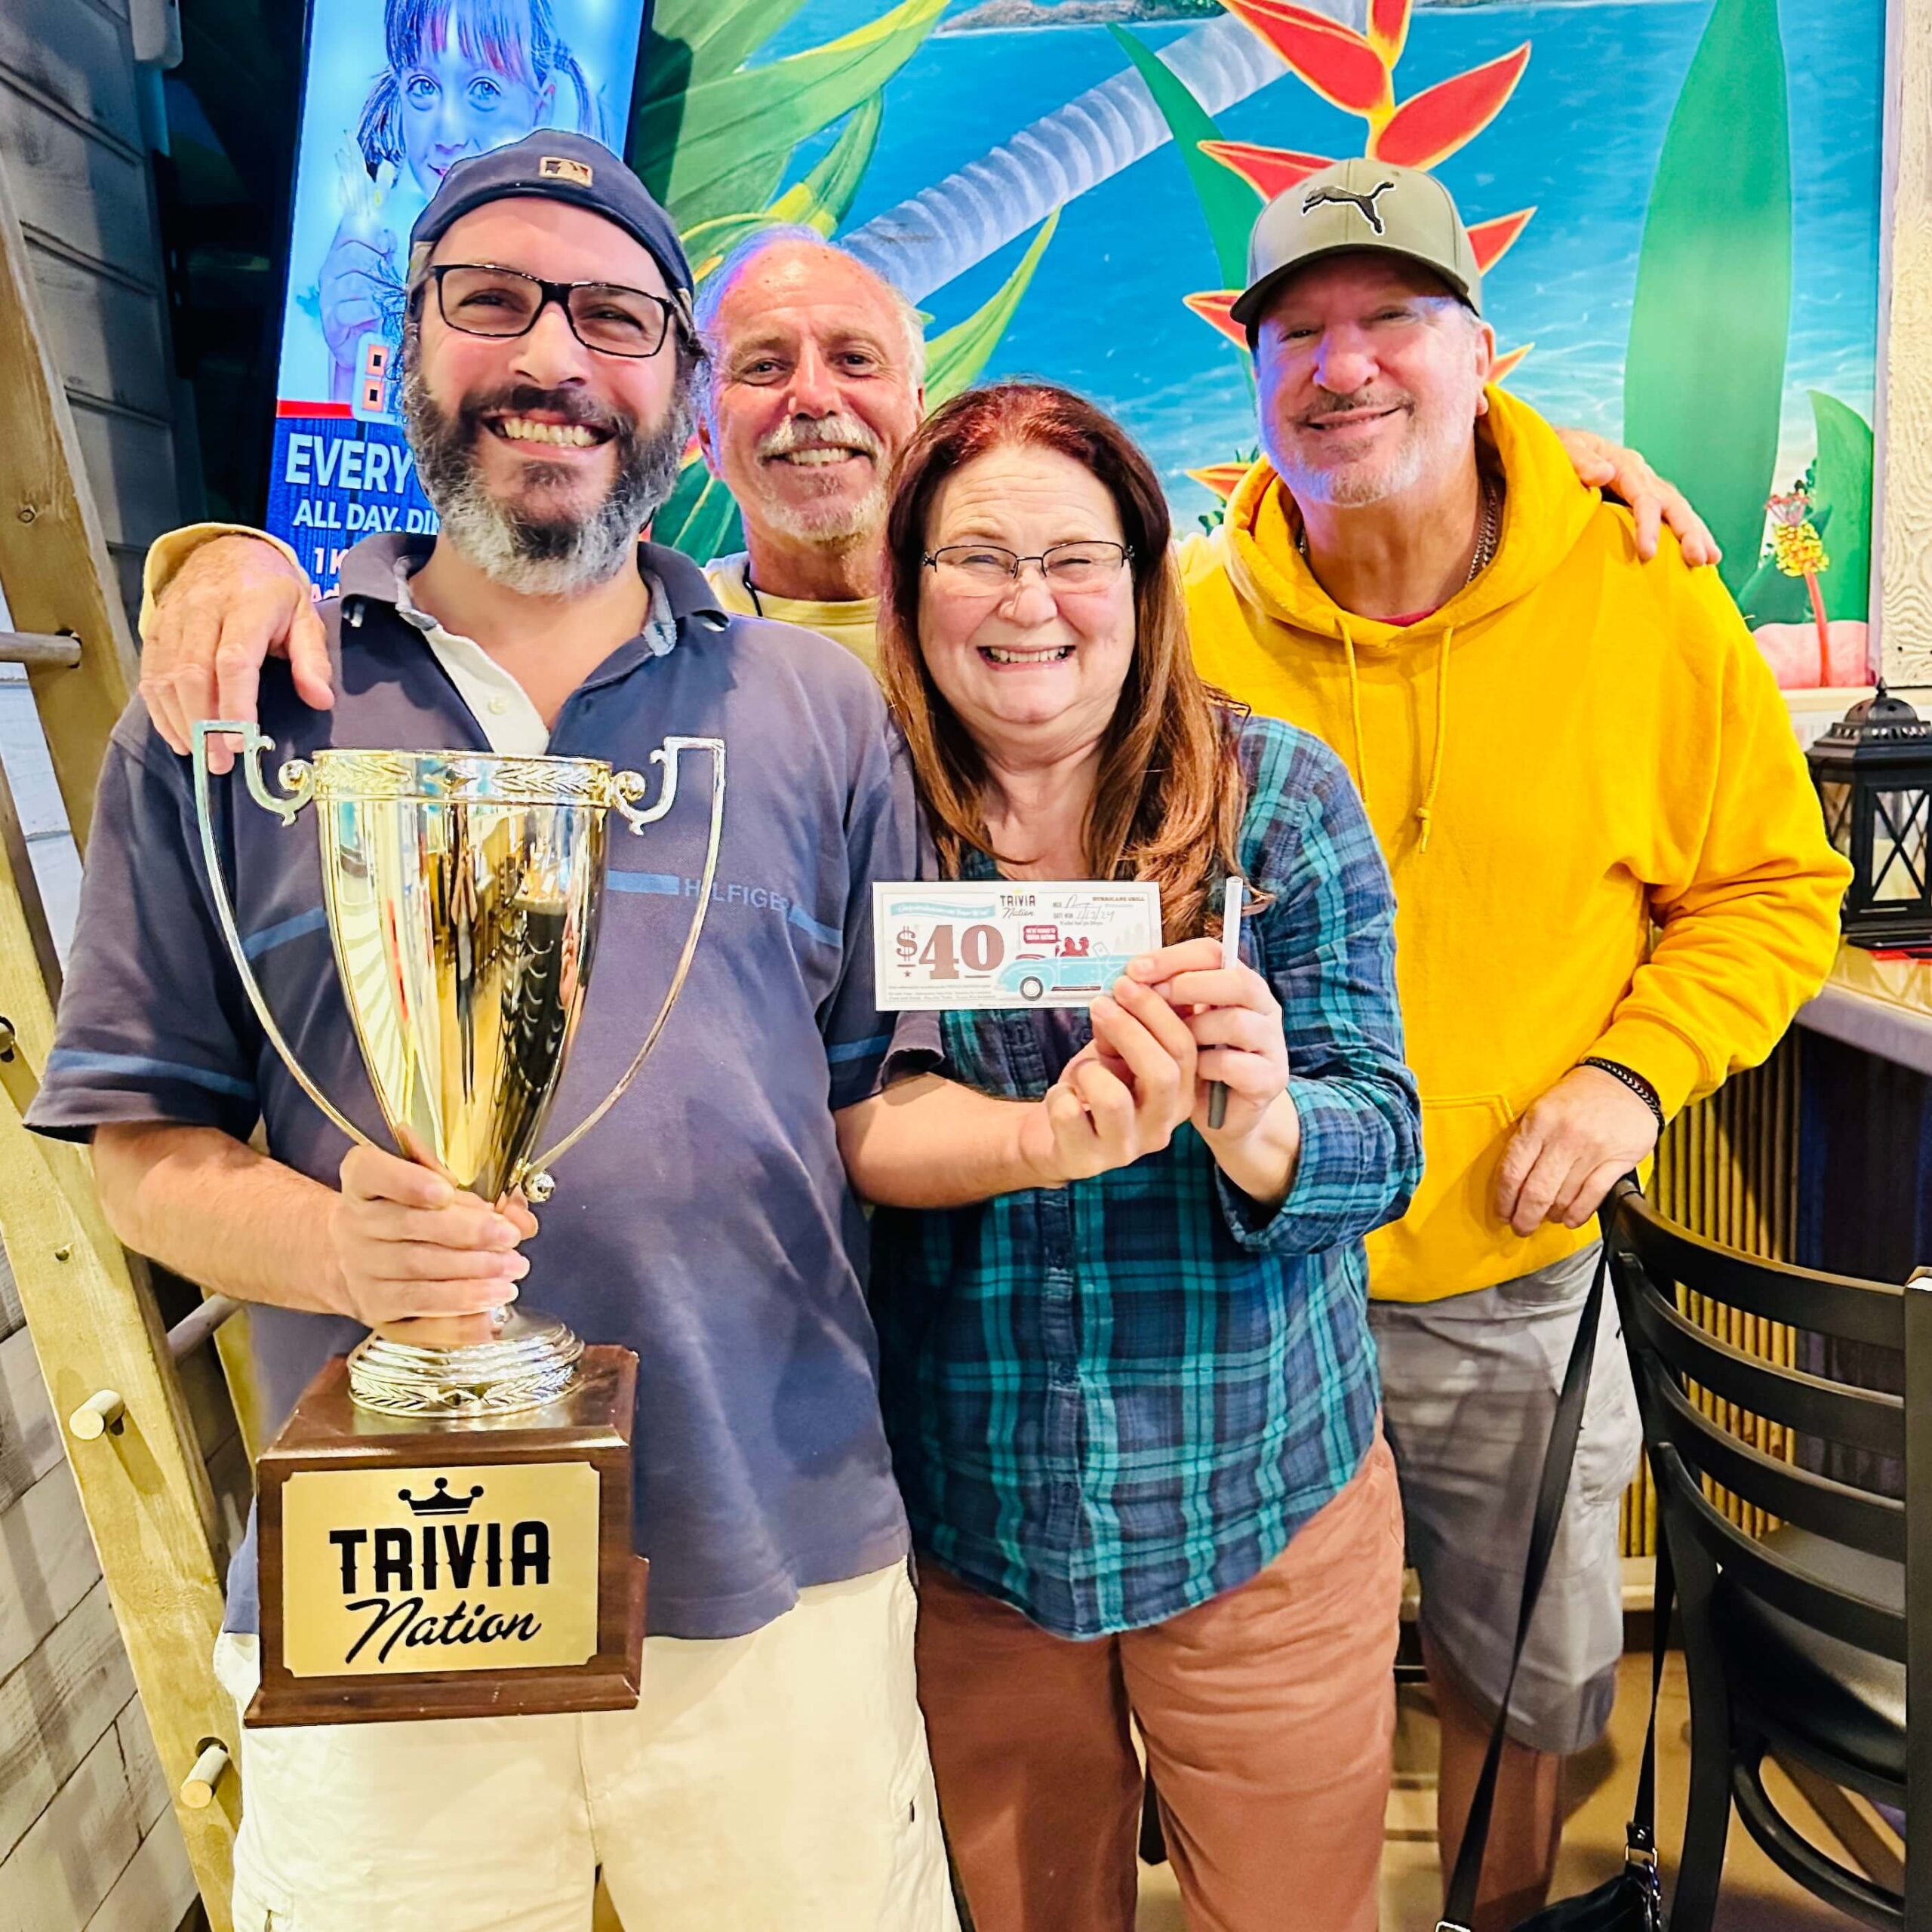 Hurricane Grill & Wings Port St. Lucie FL 34952 trivia night 8